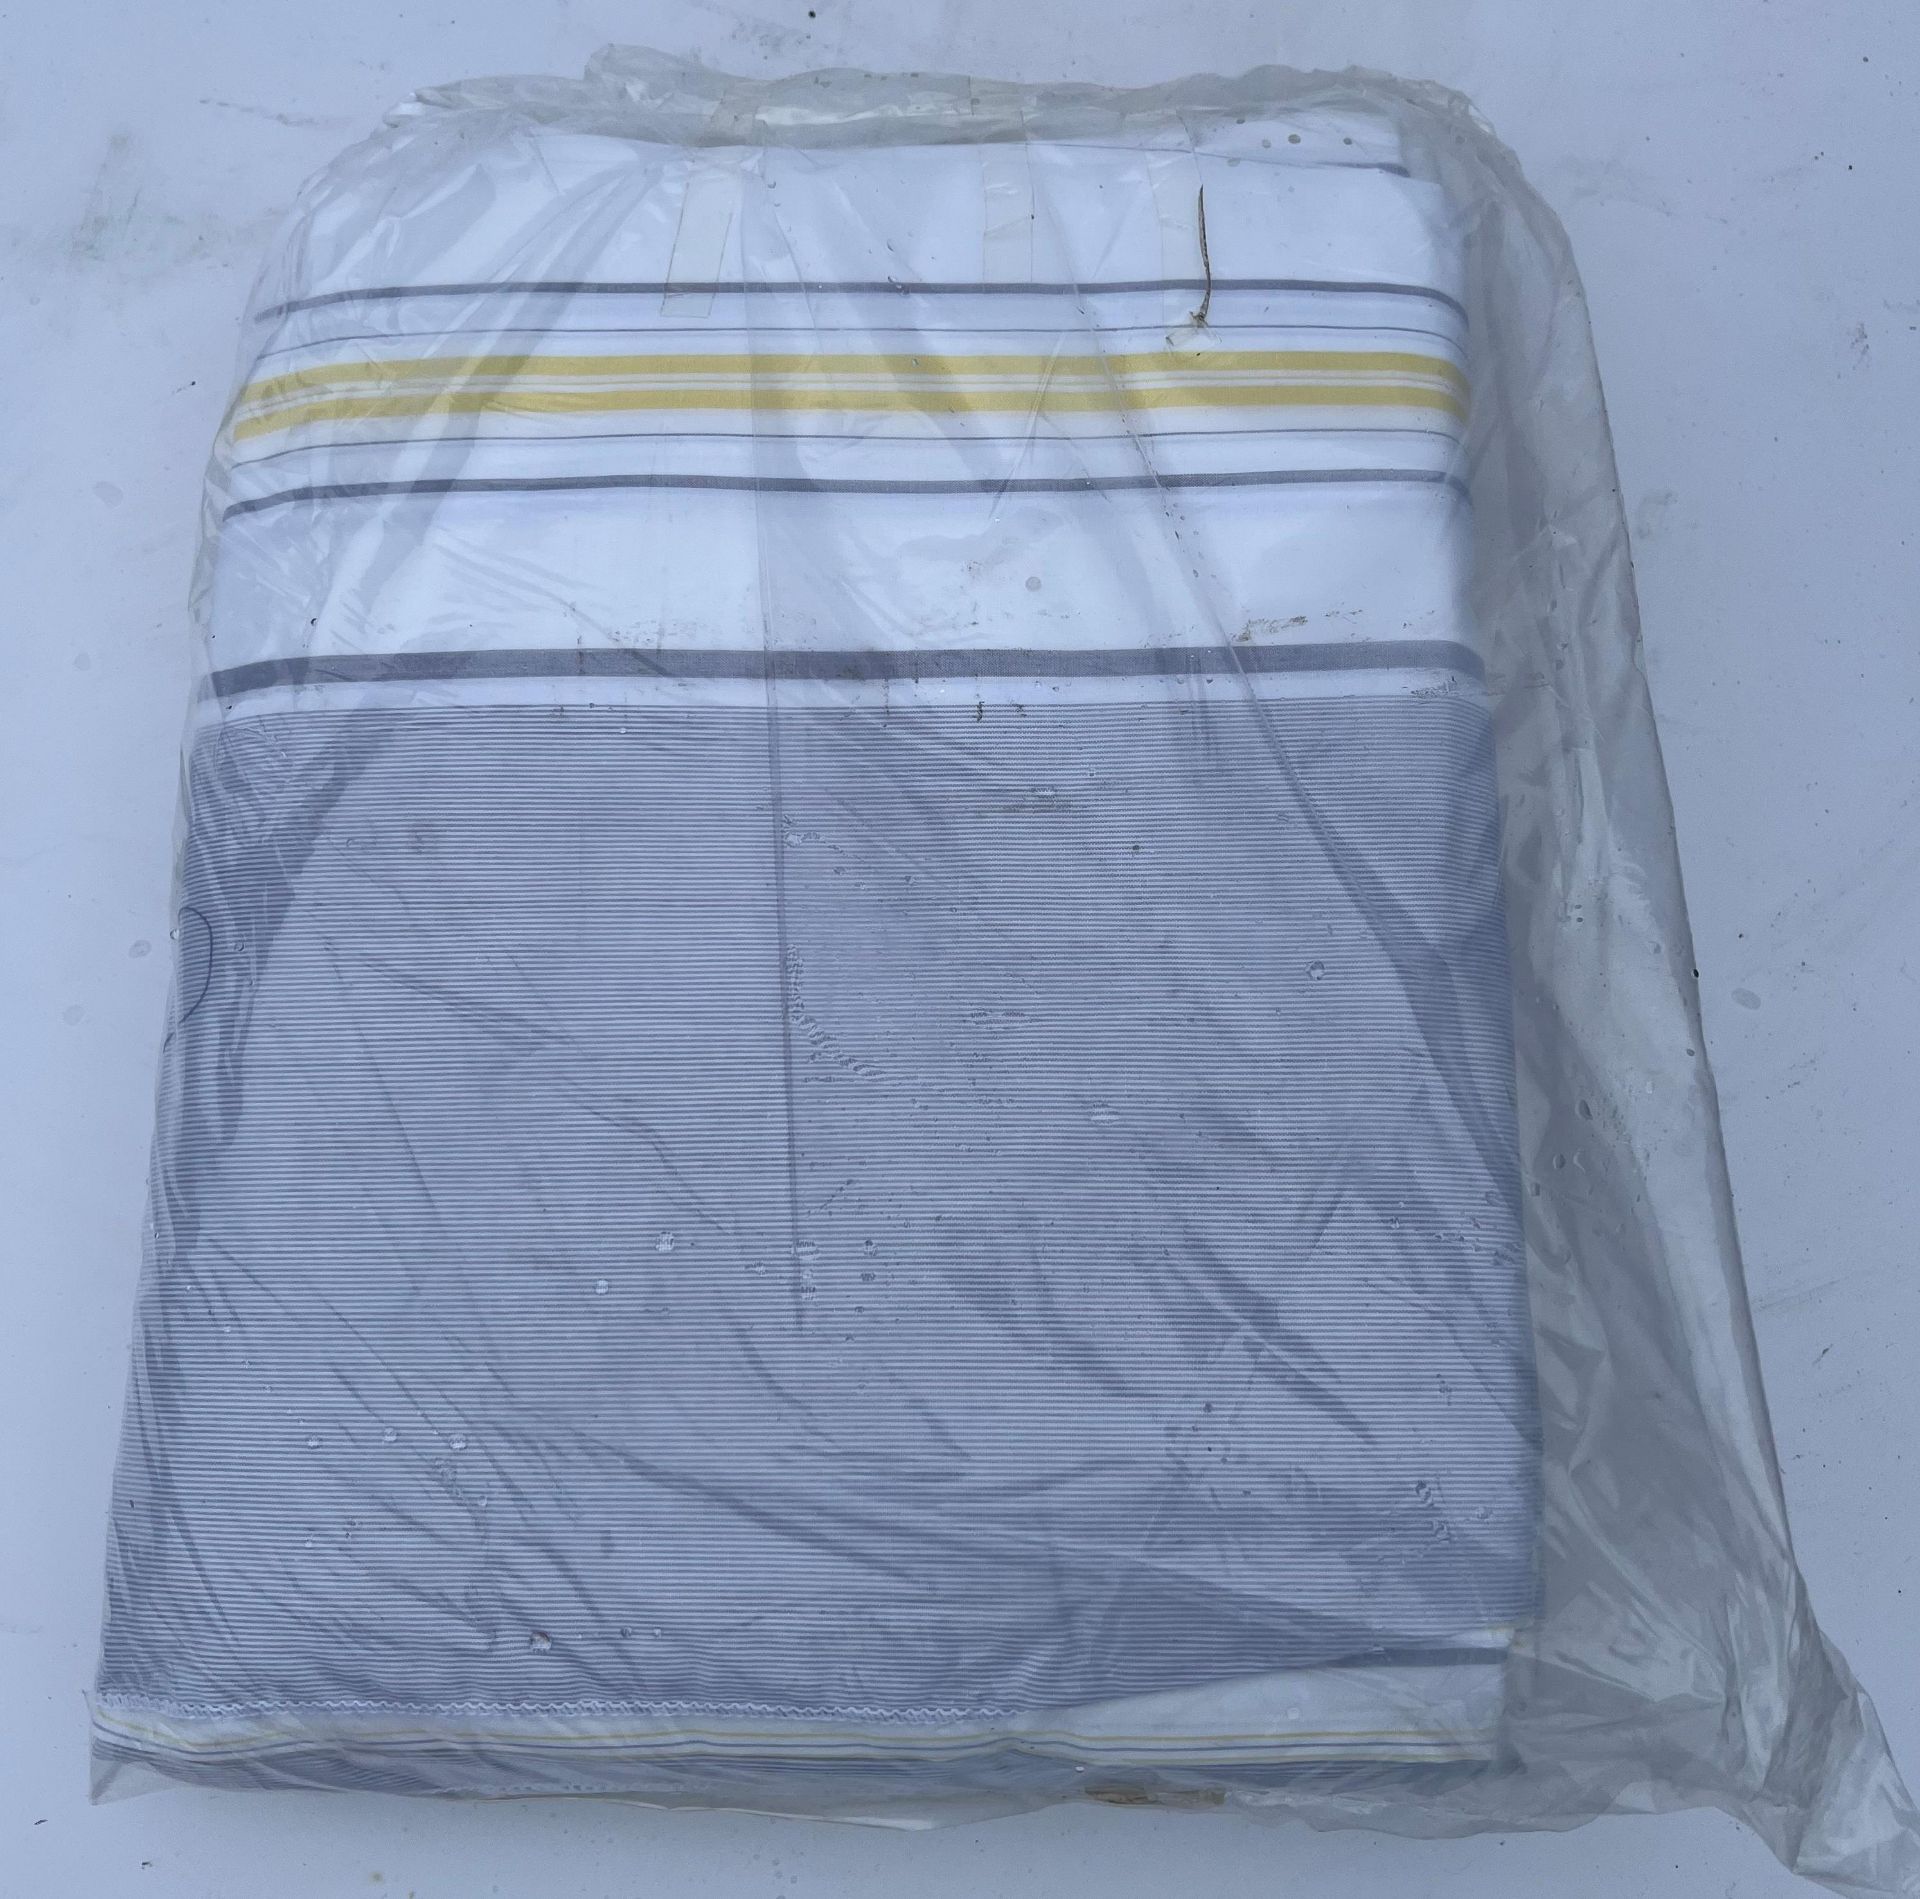 250 x new luxury king size duvet covers, RRP £12.